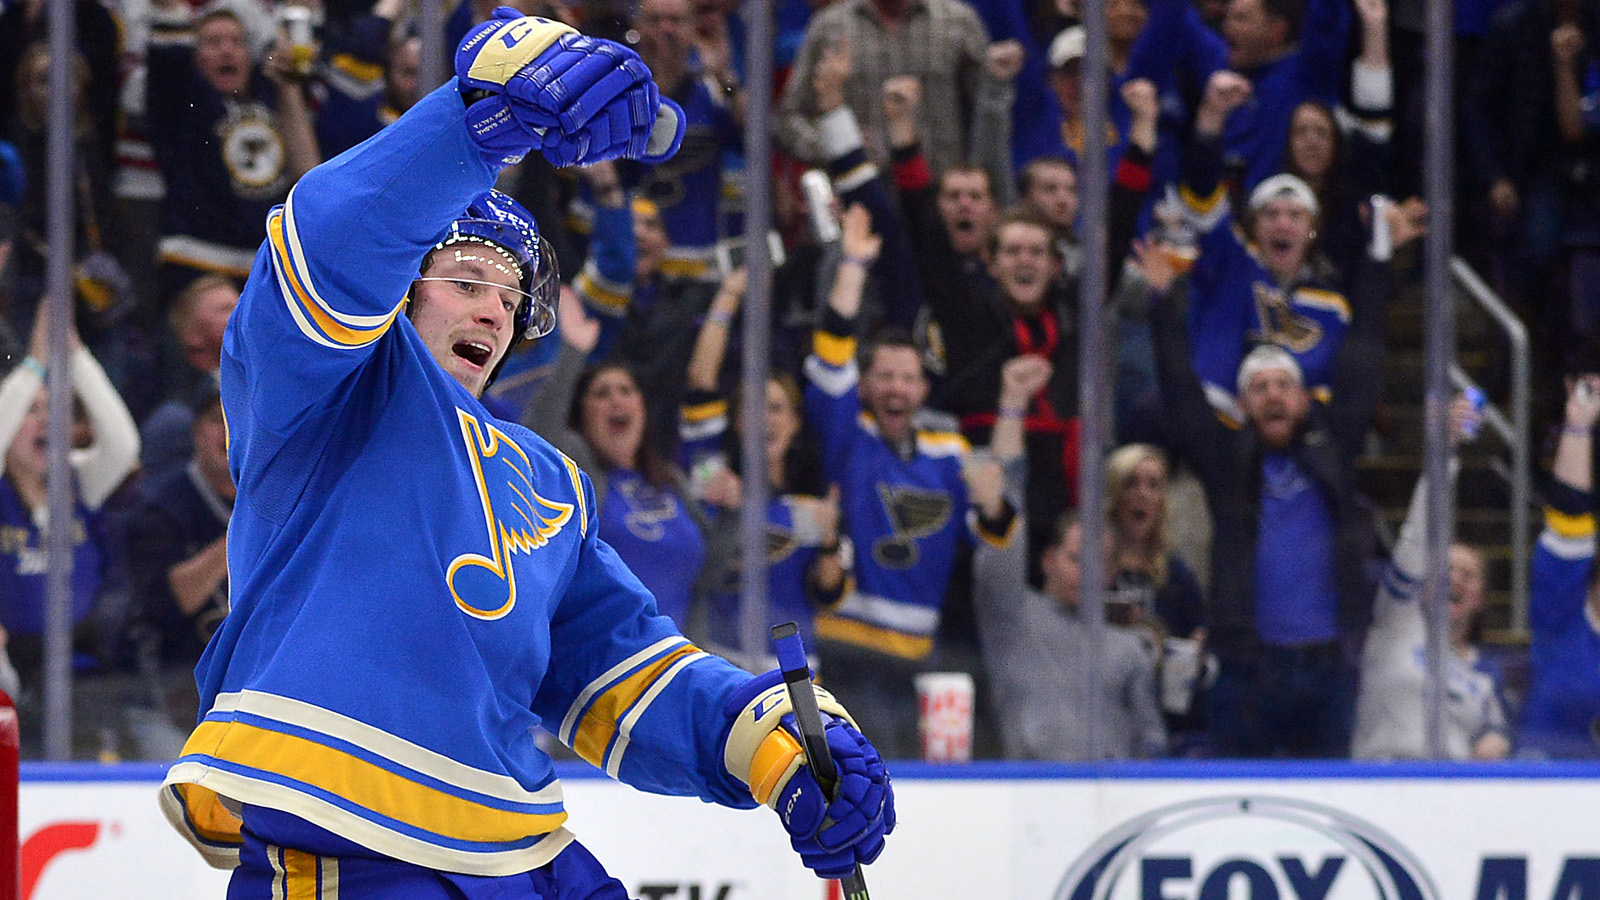 Blues bounce back in a major way with 7-3 victory over Blackhawks